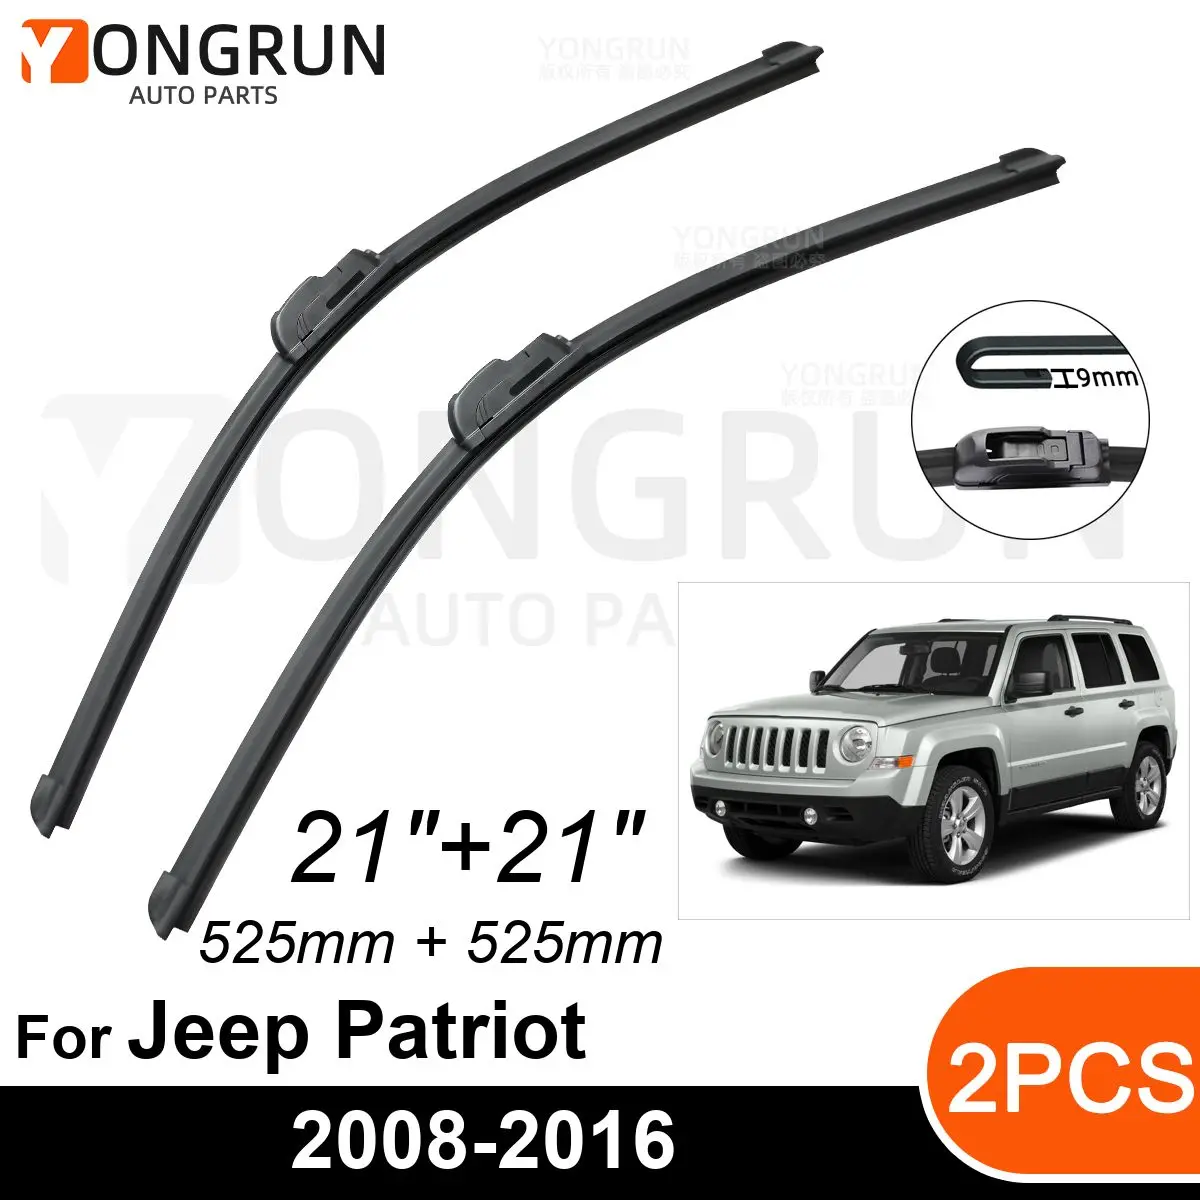 

Car Front Windshield Wipers For Jeep Patriot 2008-2016 Wiper Blade Rubber 21"+21" Car Windshield Windscreen Accessories